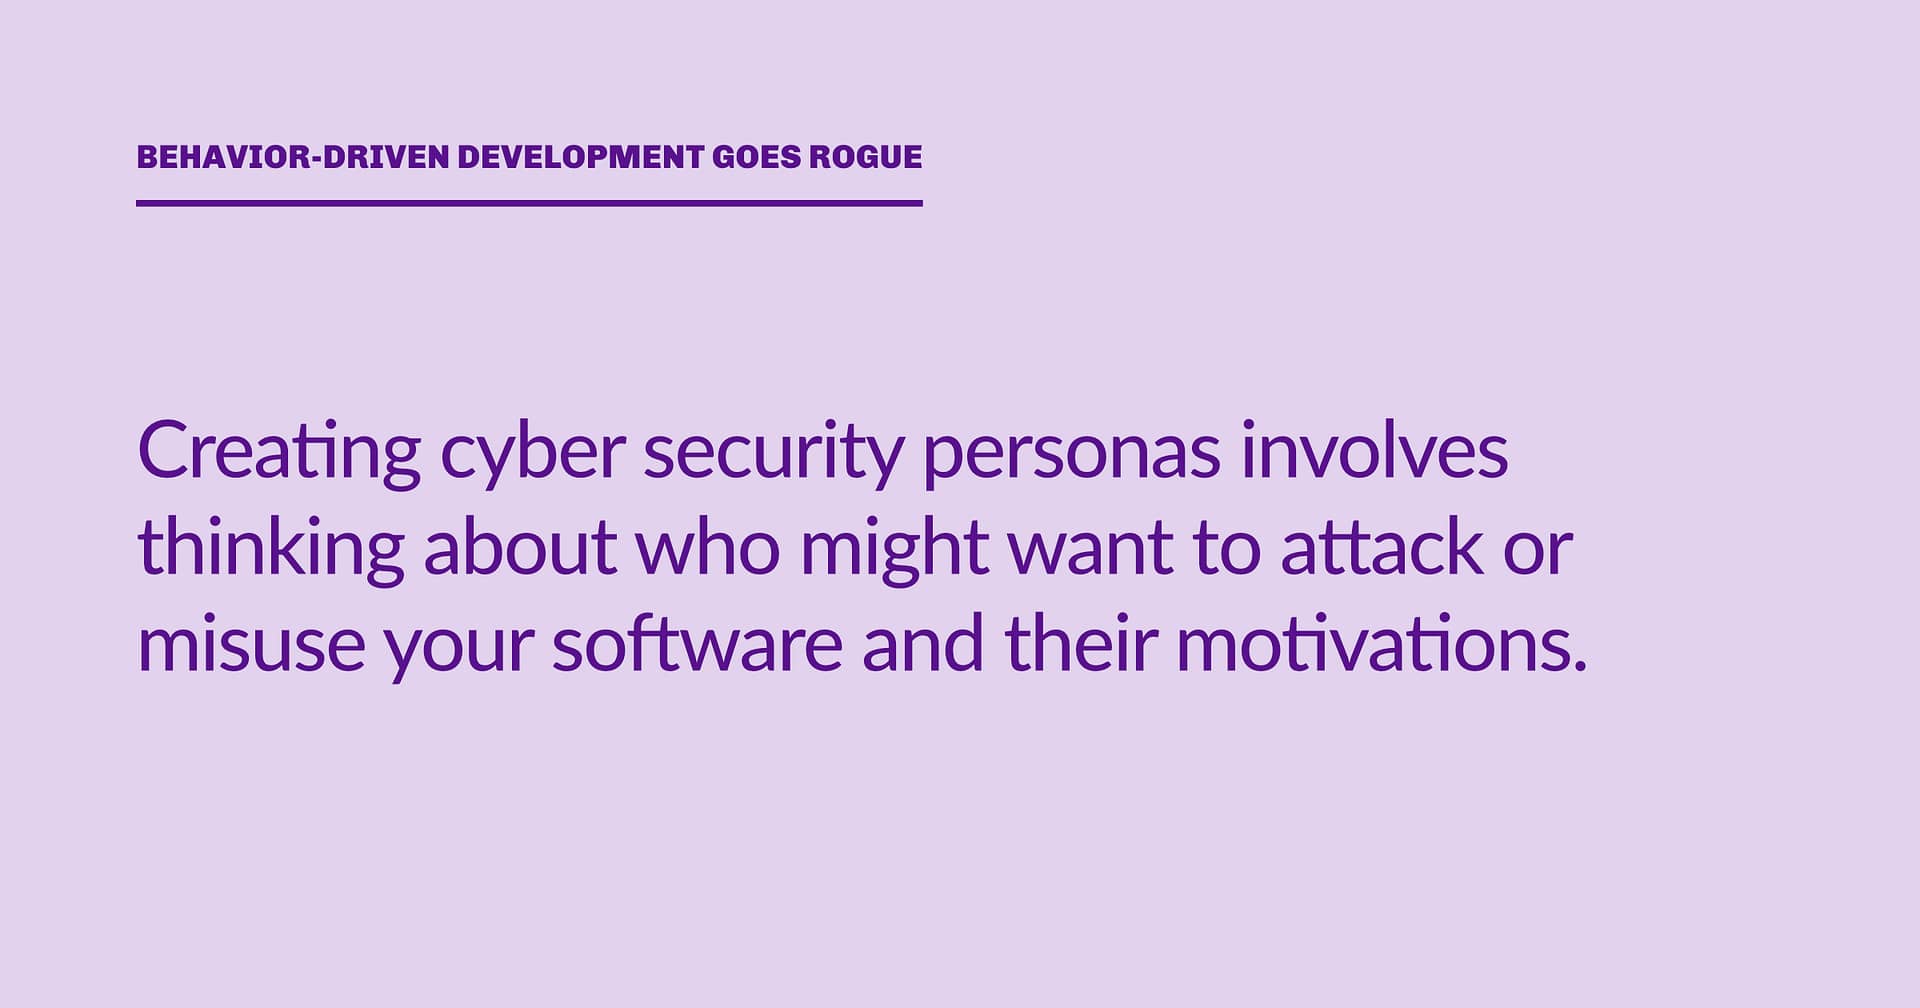 Highlight block: Creating cyber security personas involves thinking about who might want to attack or misuse your software and their motivations.